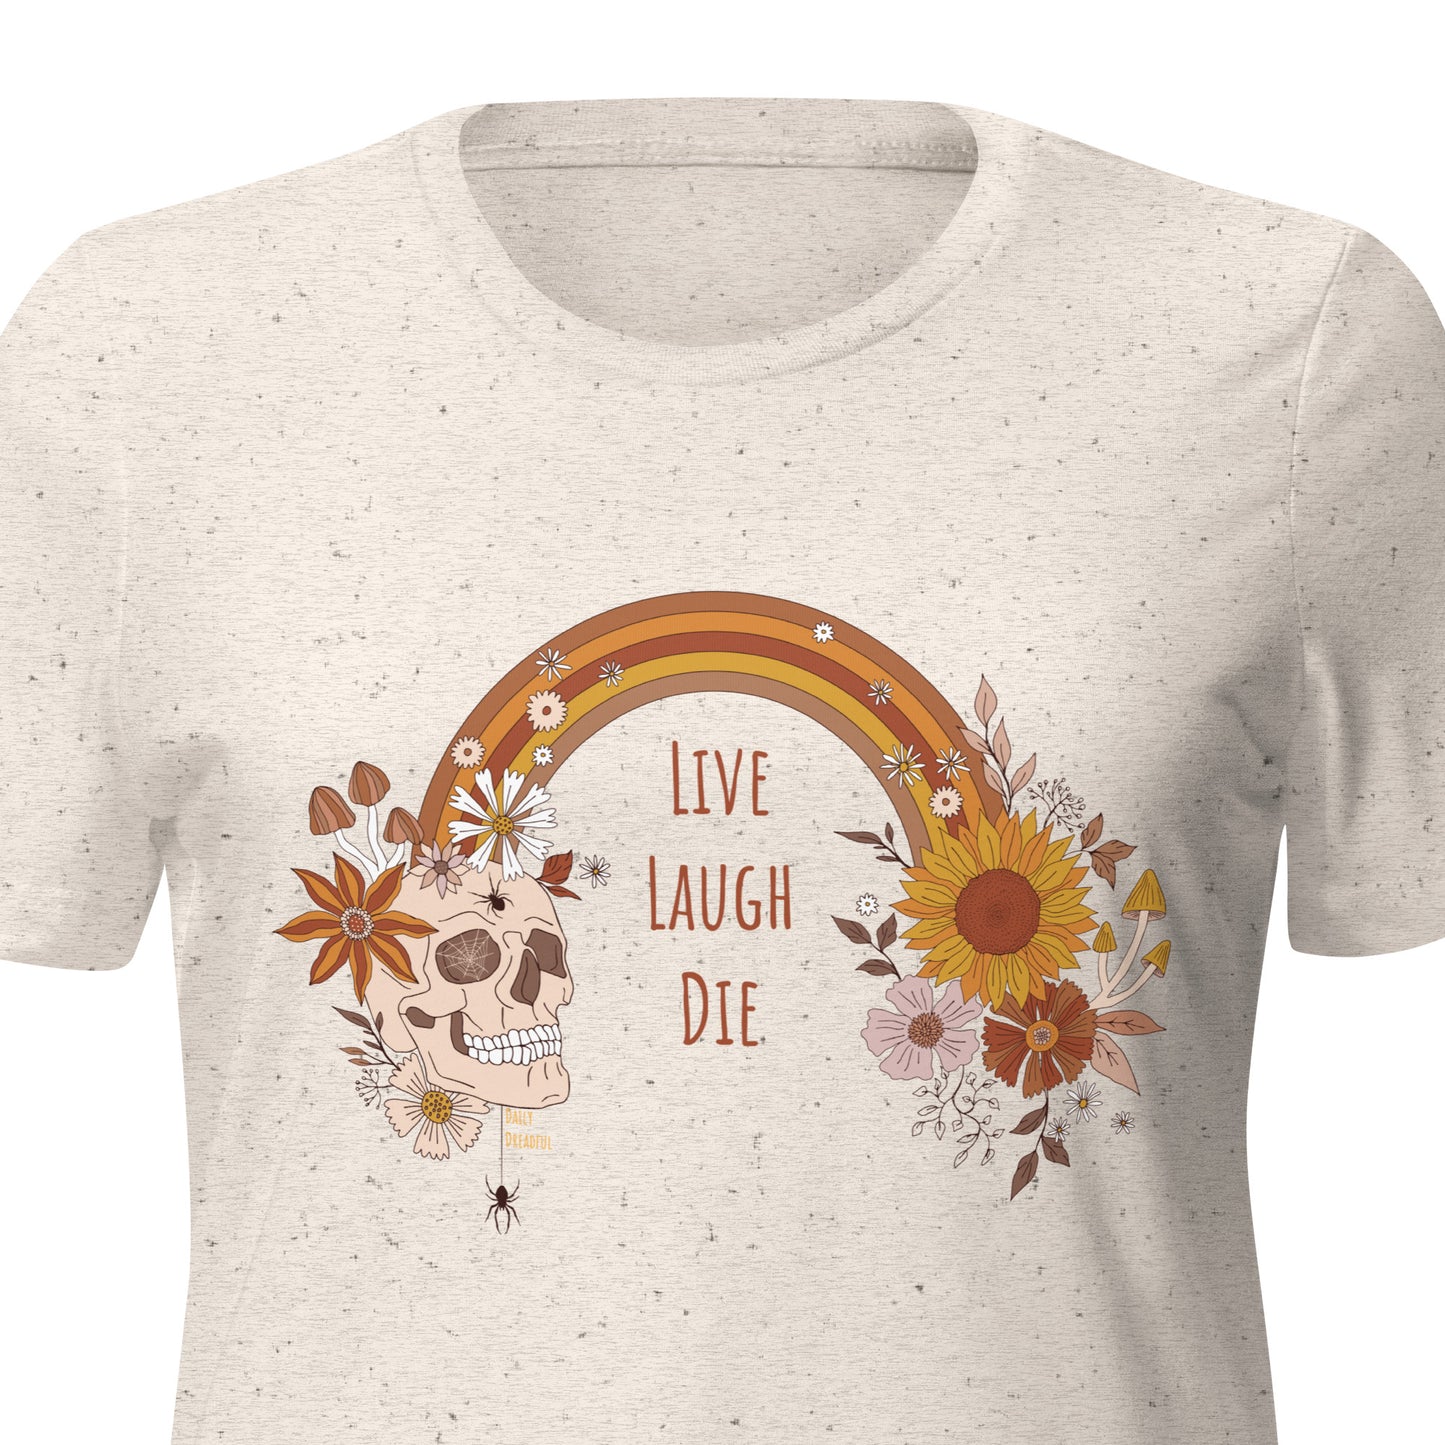 "Live, Laugh, Die" relaxed tri-blend t-shirt, oatmeal colored tee